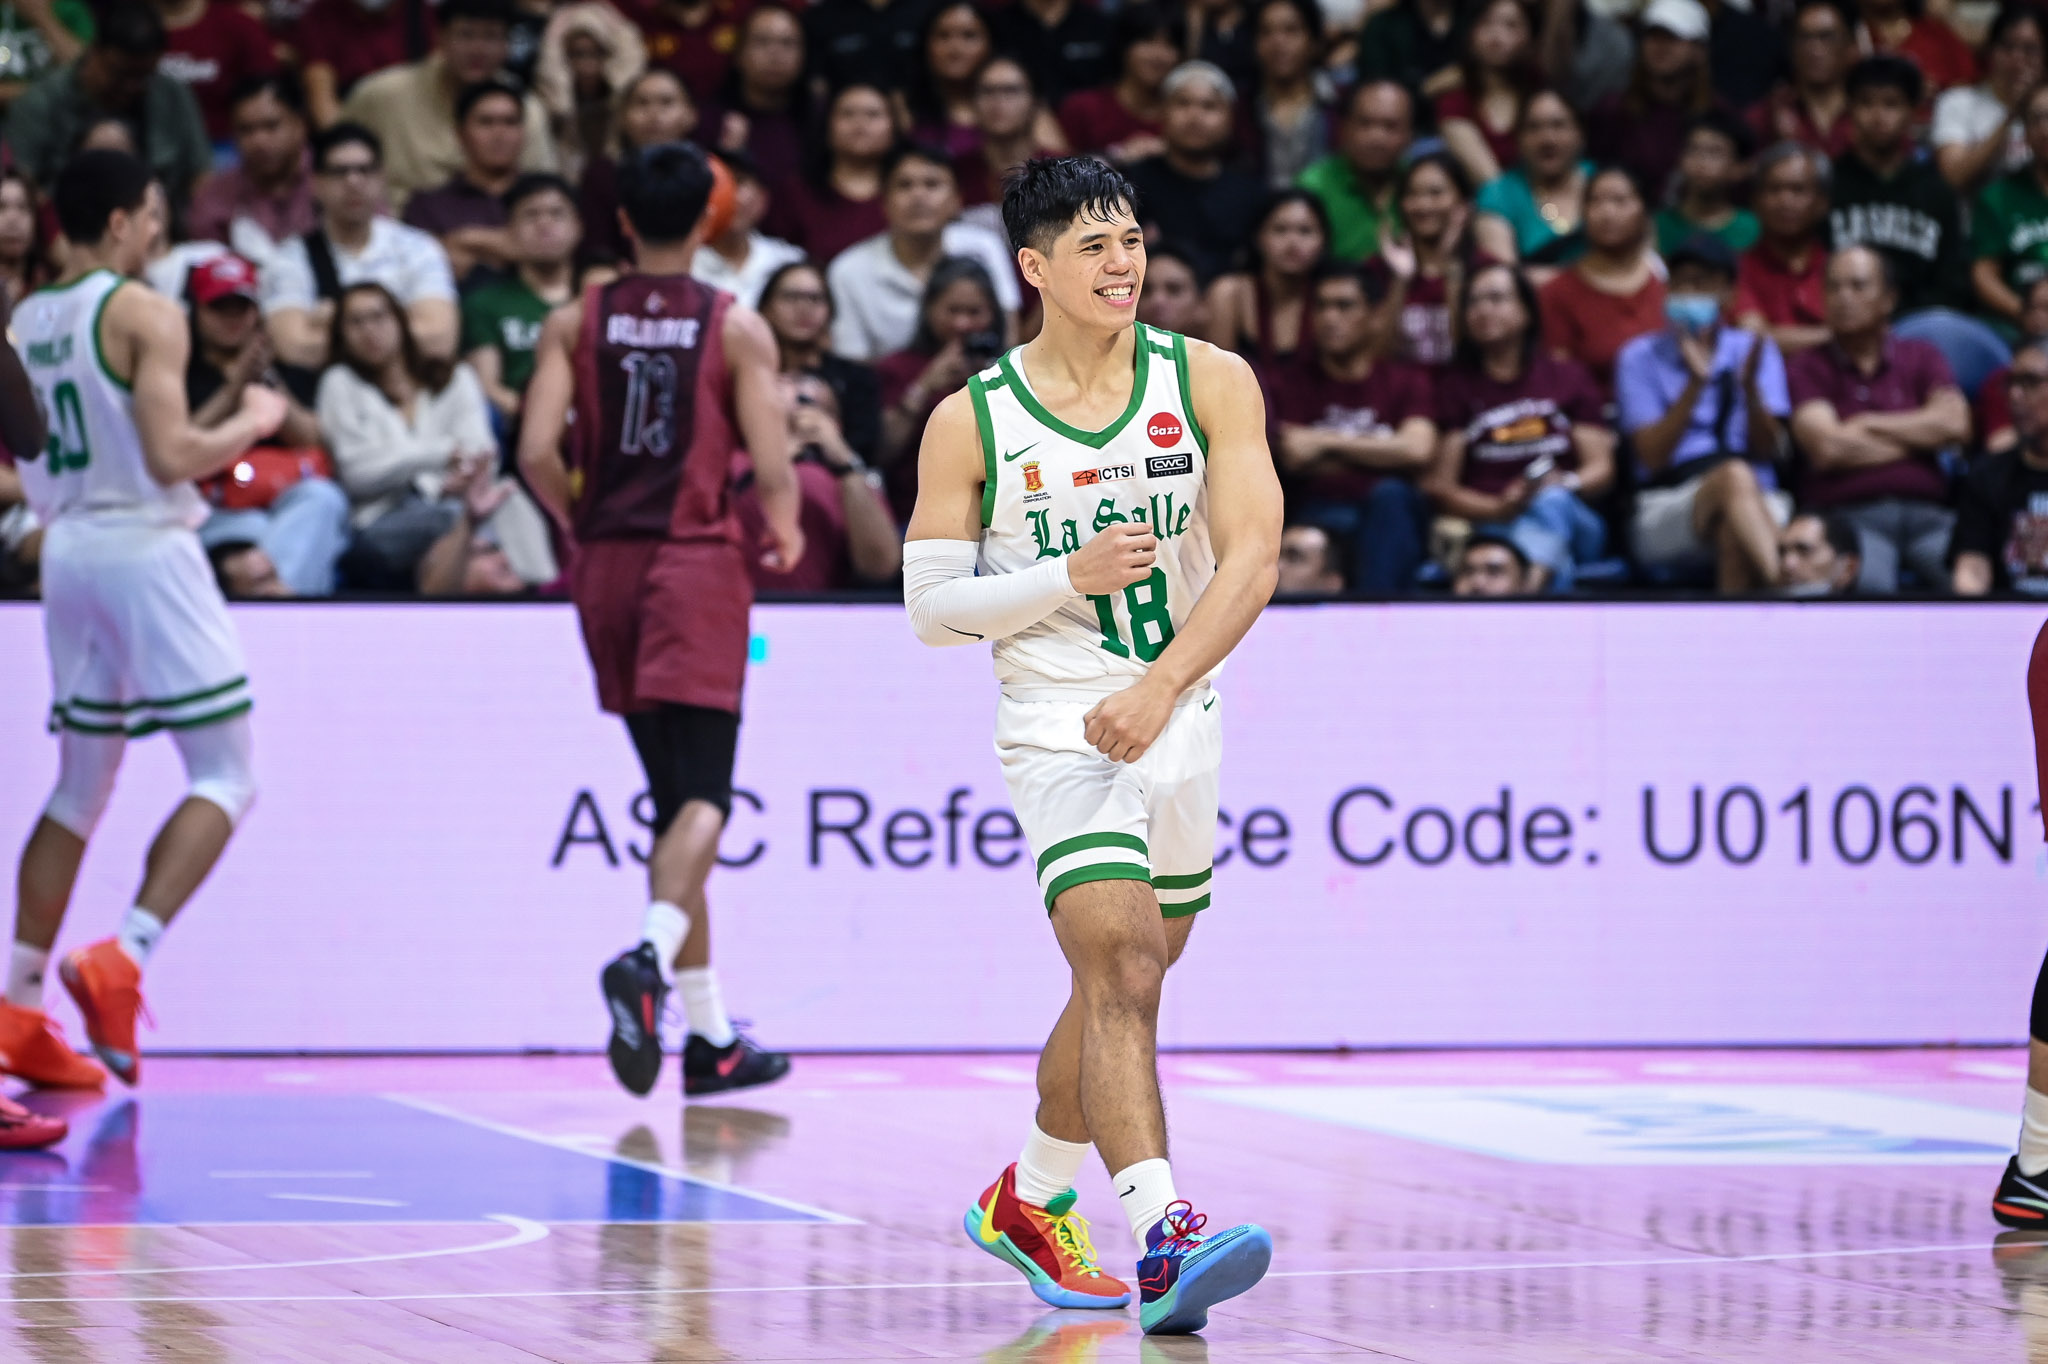 UAAP86-MBB-G2-Francis-Escandor-2626 Ef Escandor not letting Game 2 performance get in way of championship aspirations Basketball DLSU News UAAP  - philippine sports news